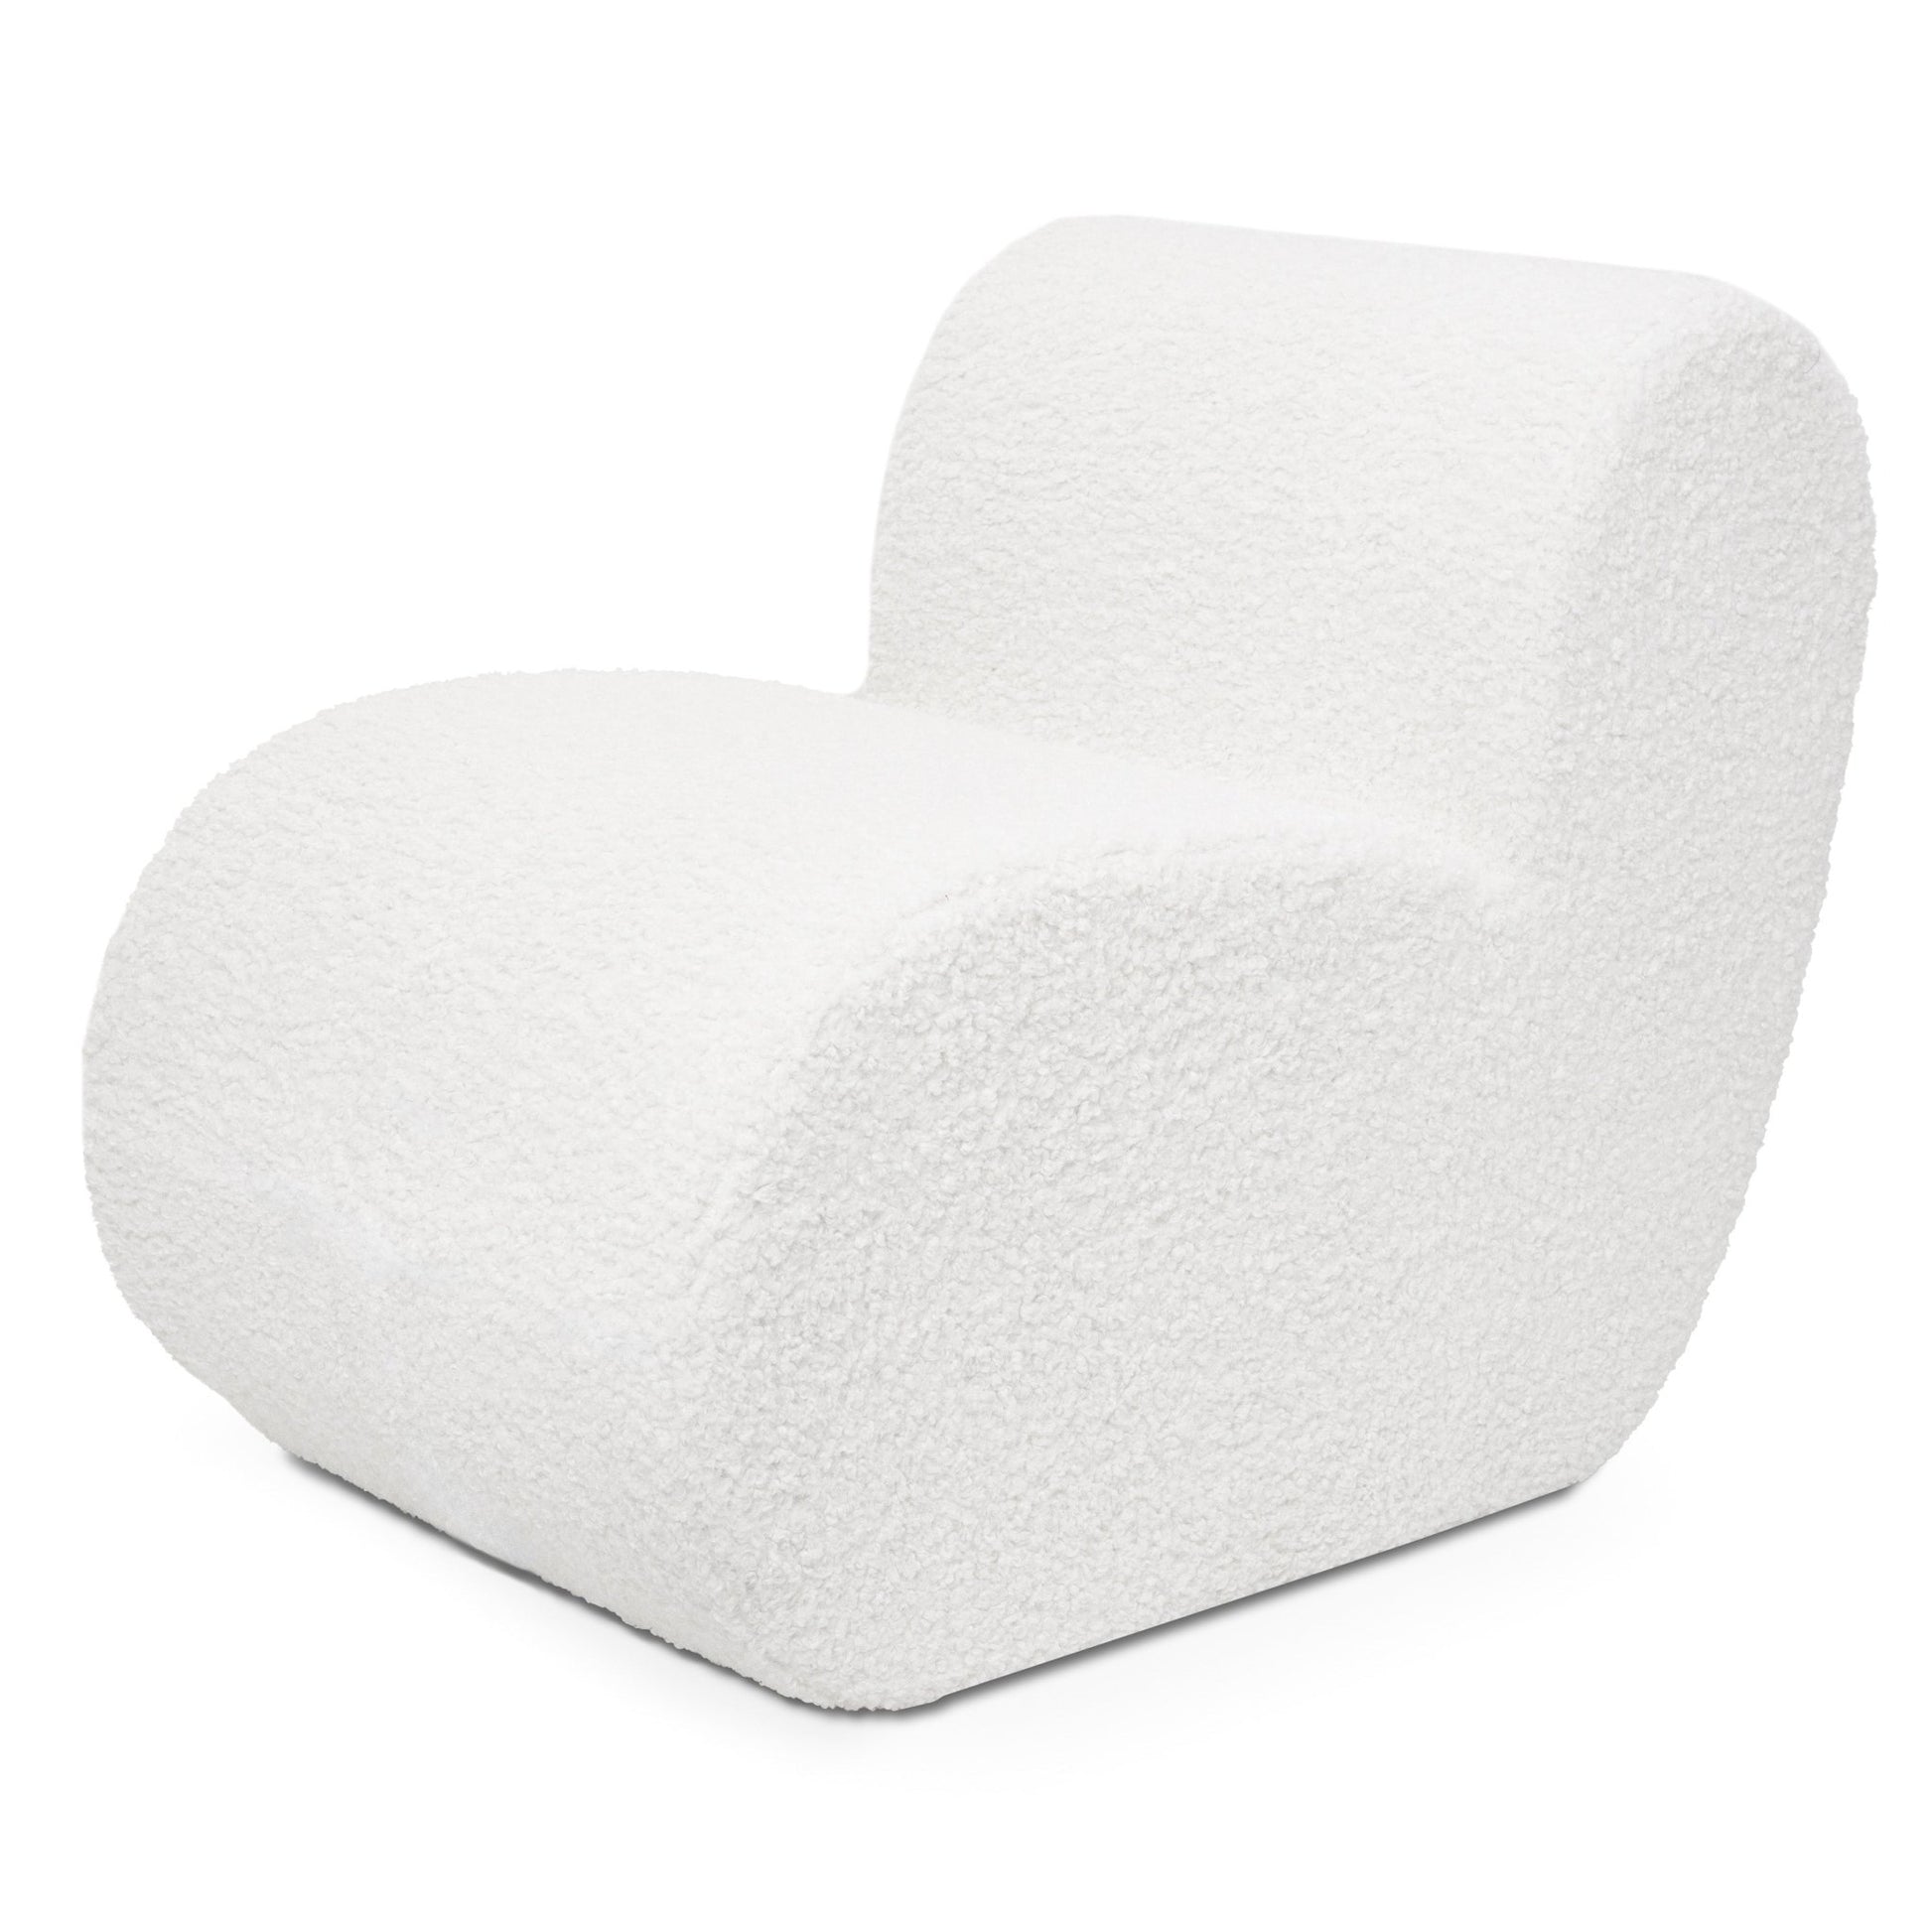 Jaxx Toccoa Chair - Luxurious Modern Sculpted Seating with Plush Sherpa Cover (19777) - SchoolOutlet